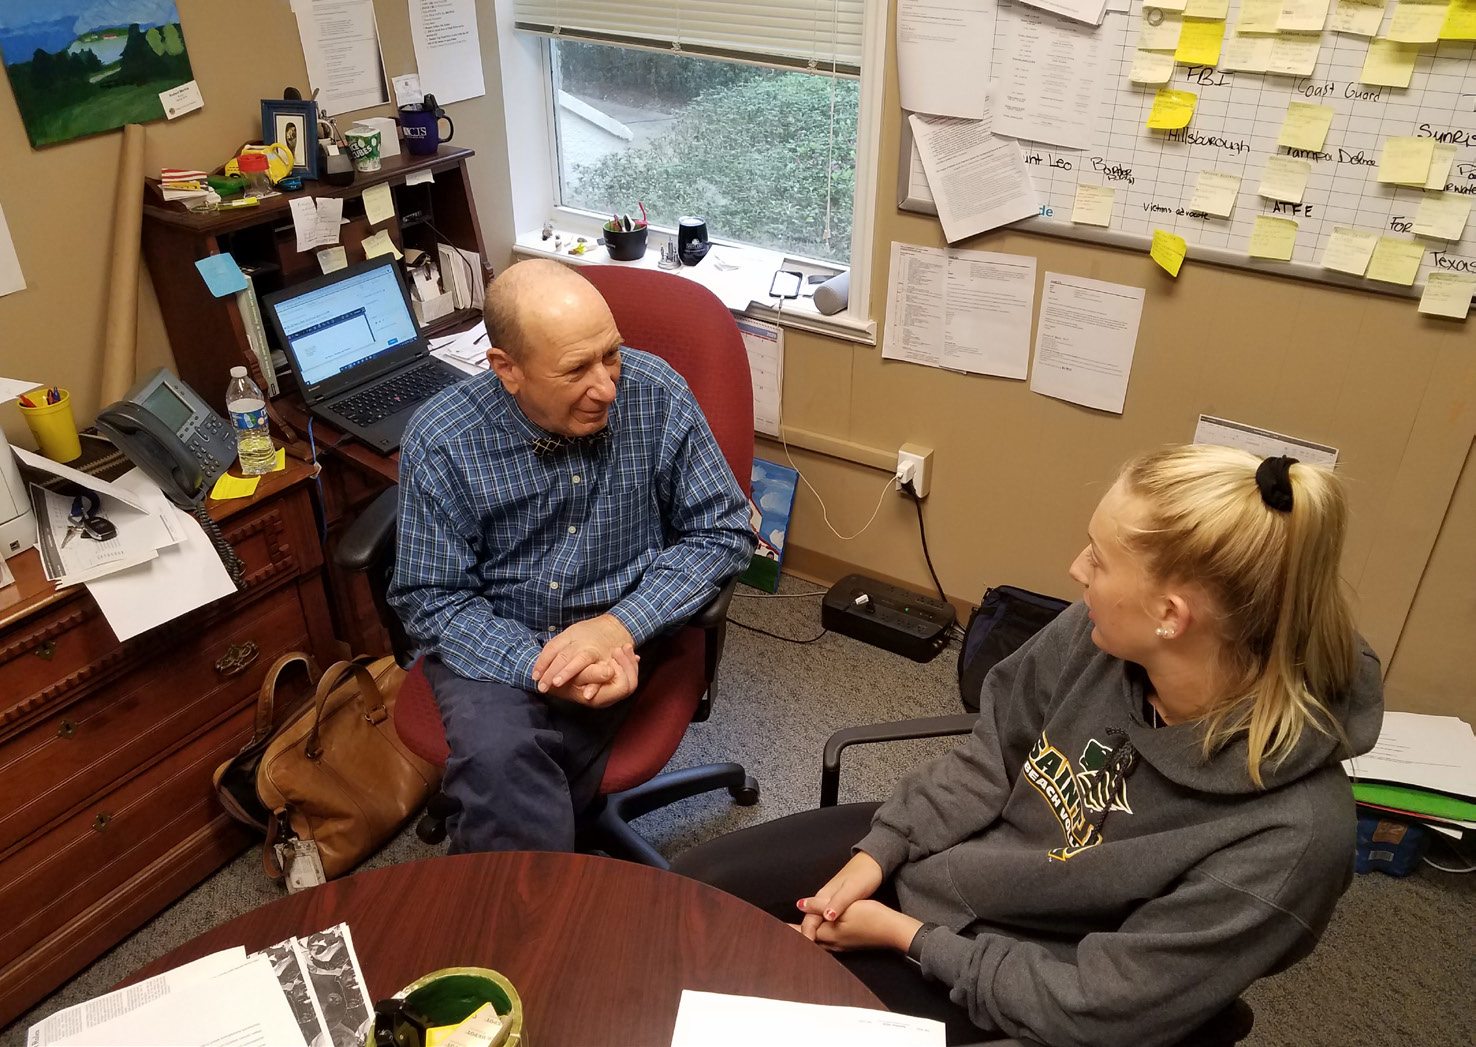  The hustle and bustle of Dr. Cillo's office is what keeps the Criminal Justice program growing. Each day a revolving door of students are consulting with him about internship opportunities or simply chatting. 